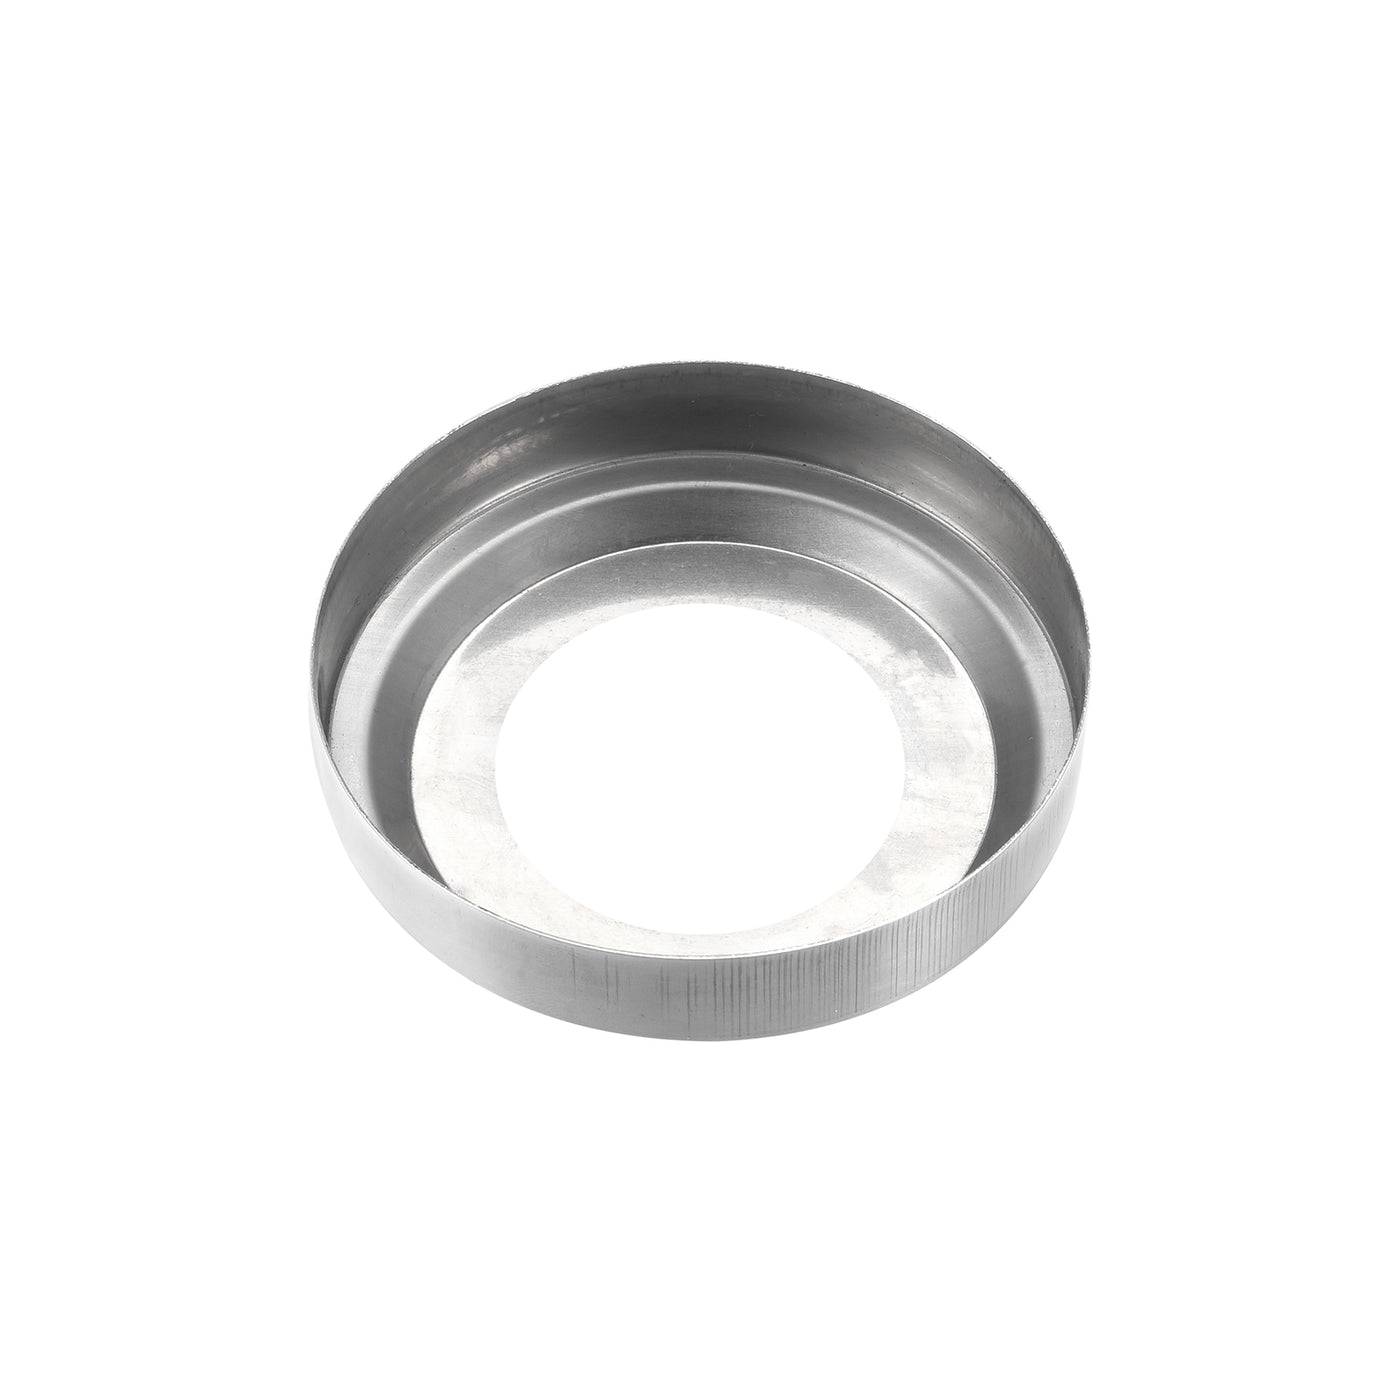 Uxcell Uxcell Round Escutcheon Plate, 8pcs 68 x 17mm 304 Stainless Steel Water Pipe Cover for 36.5mm Diameter Pipe